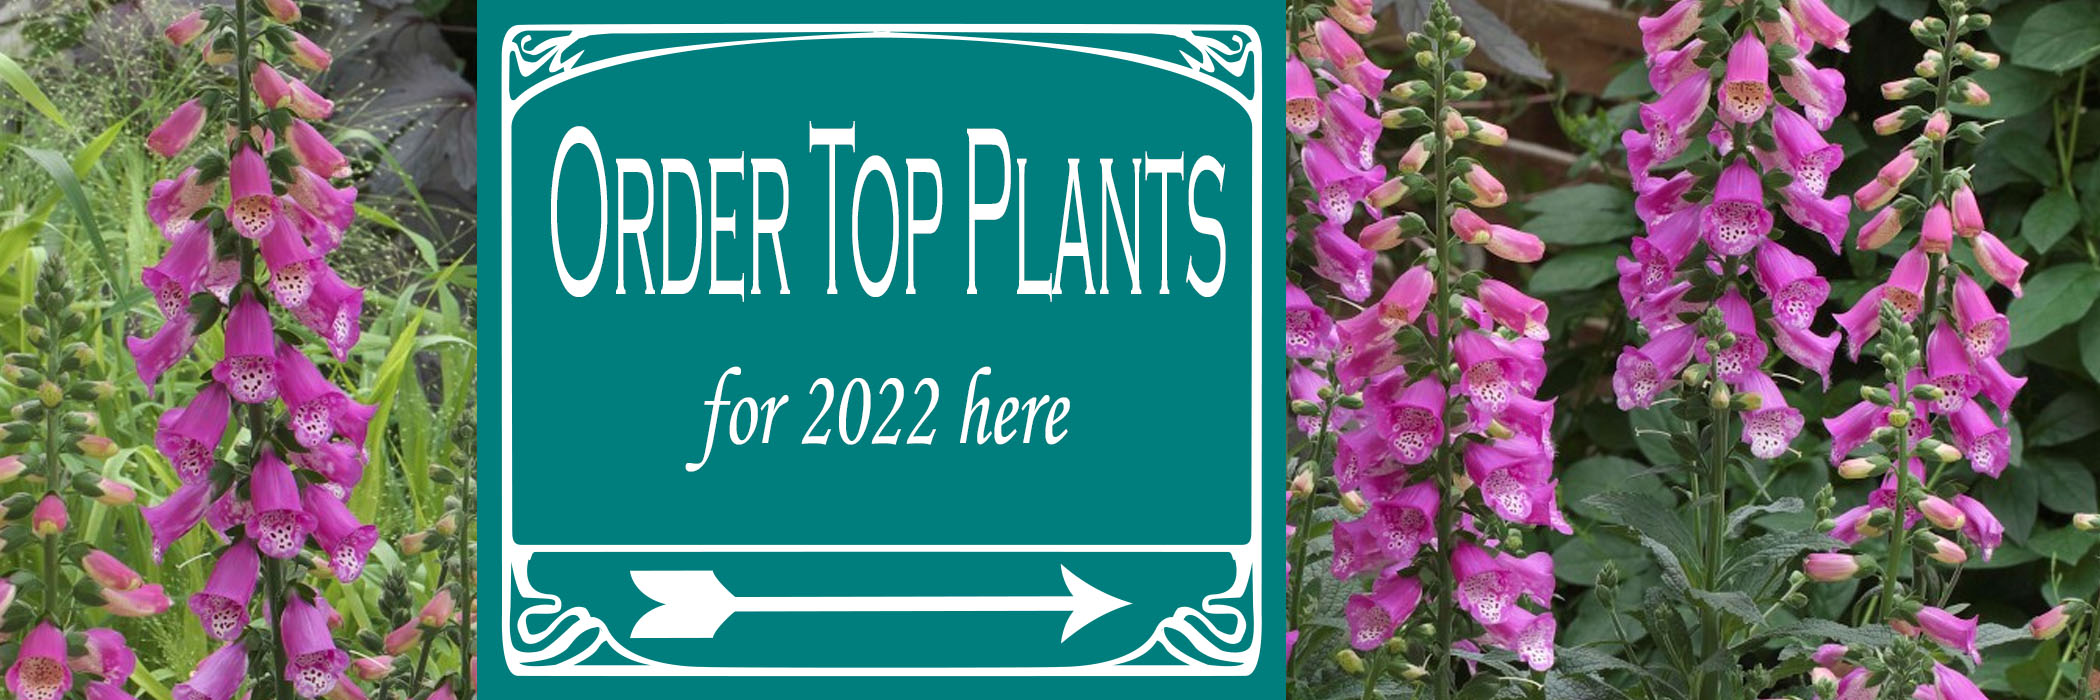 Order Top Plants for St. Louis